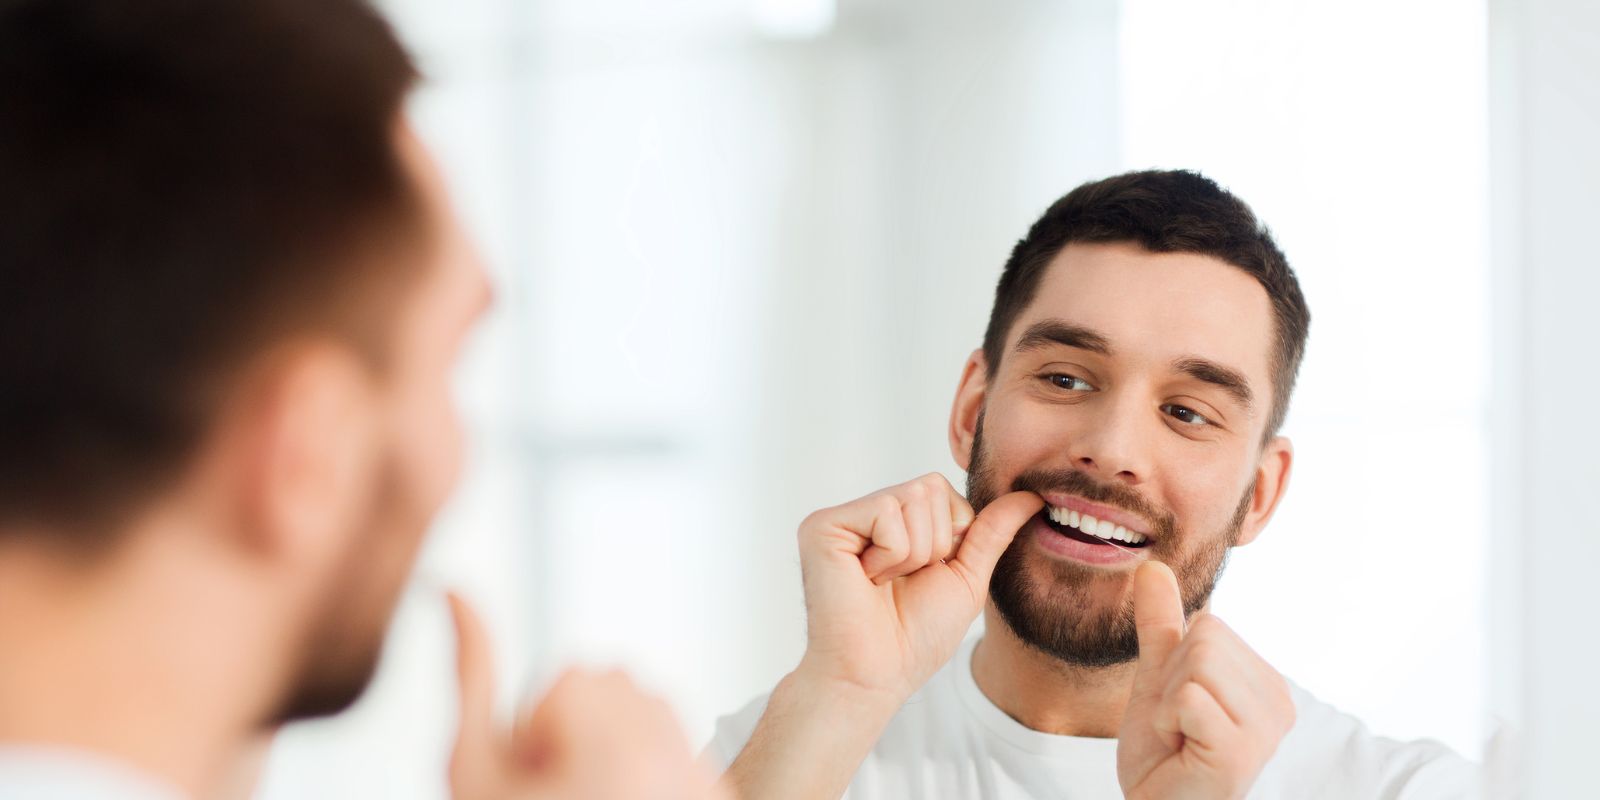 Should You Spit or Rinse After Brushing Your Teeth?